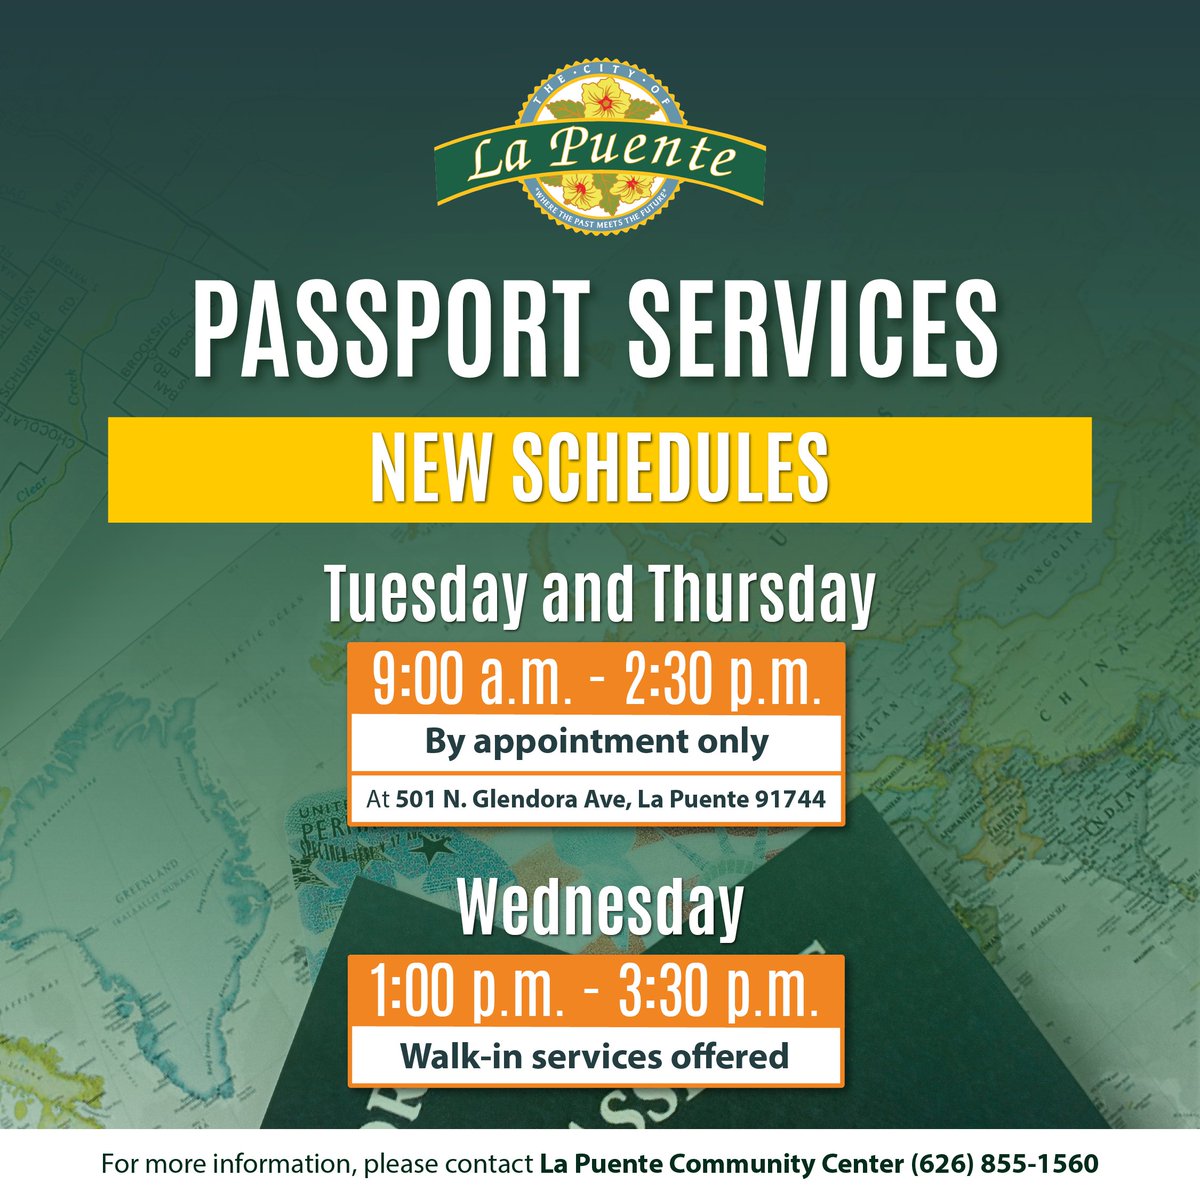 If you need assistance obtaining your passport or have questions about the process, our team can help you.
We are located at 501 N. Glendora Ave., La Puente 91744.

For more information, contact La Puente Community Center at (626) 855-1560
#LaPuente #Passportservices #appointment